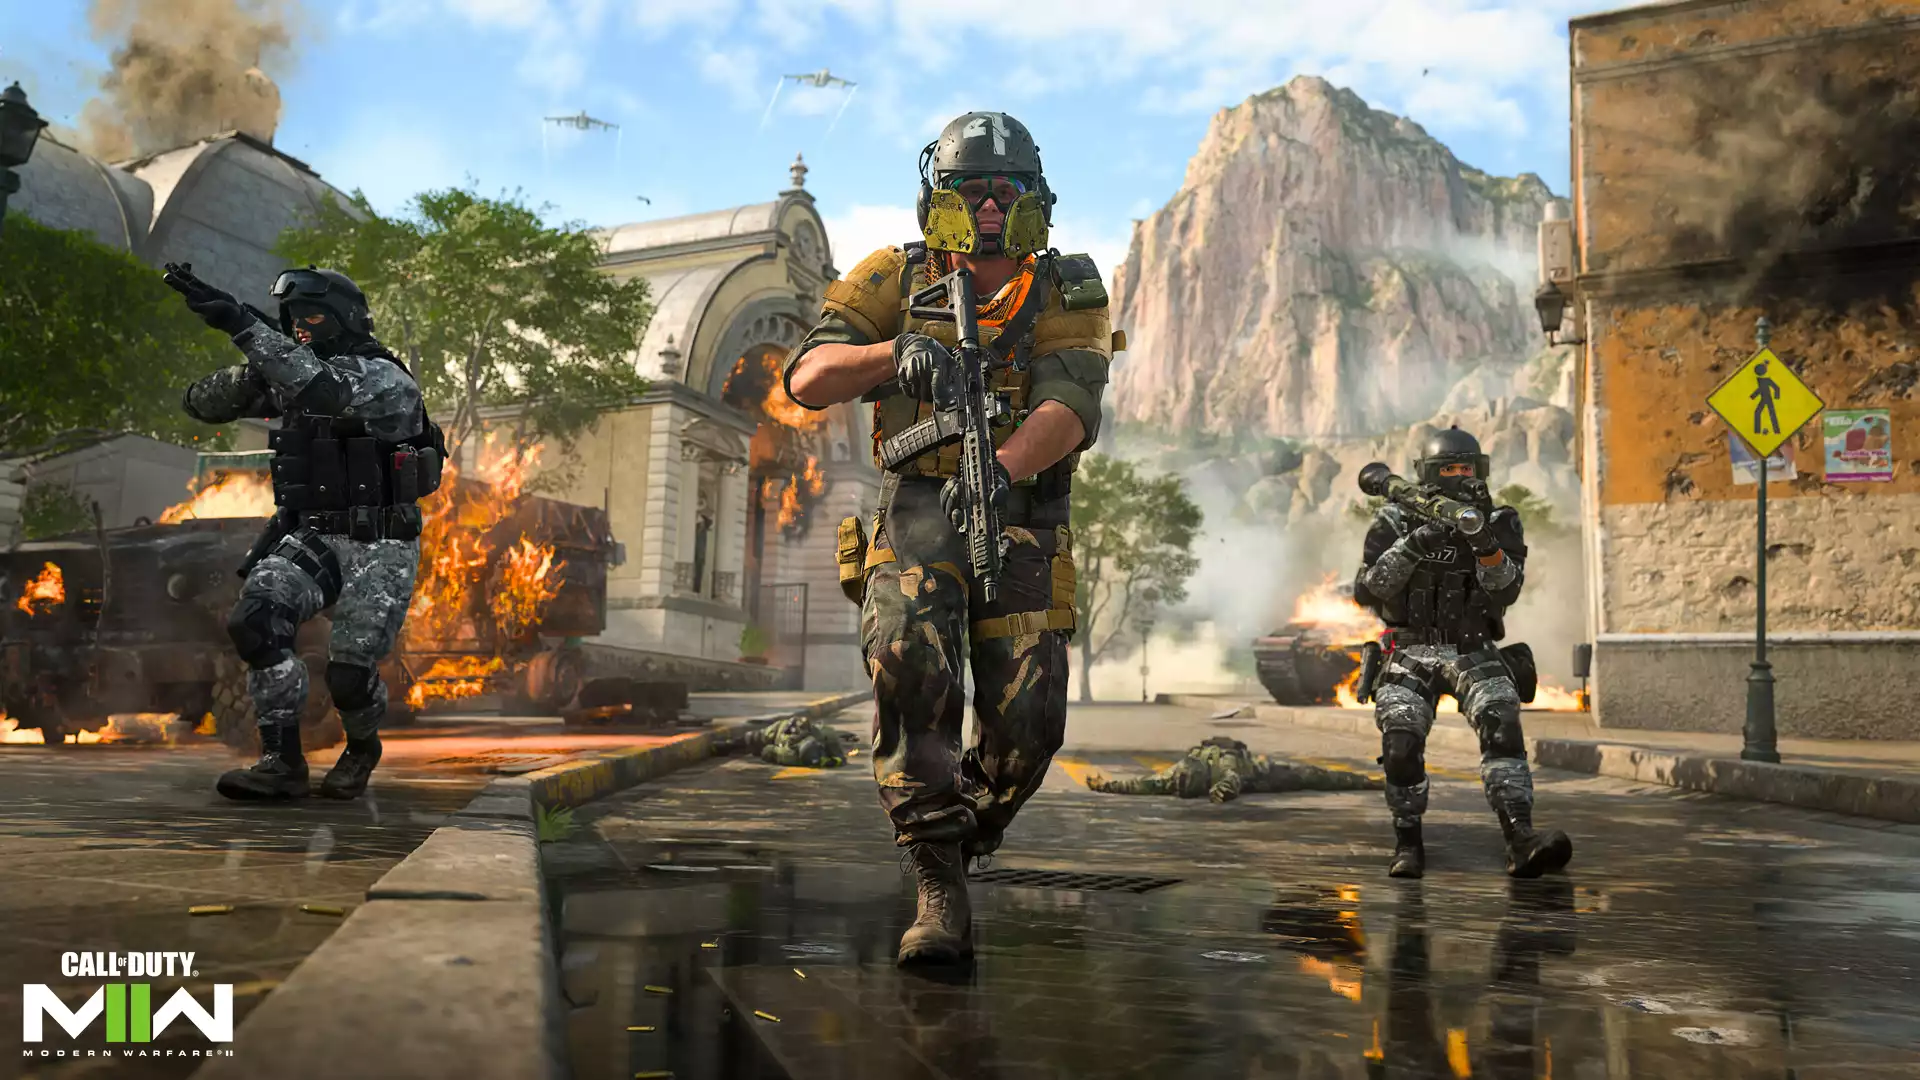 All Call of Duty games in release date order: Full list & how many are there?